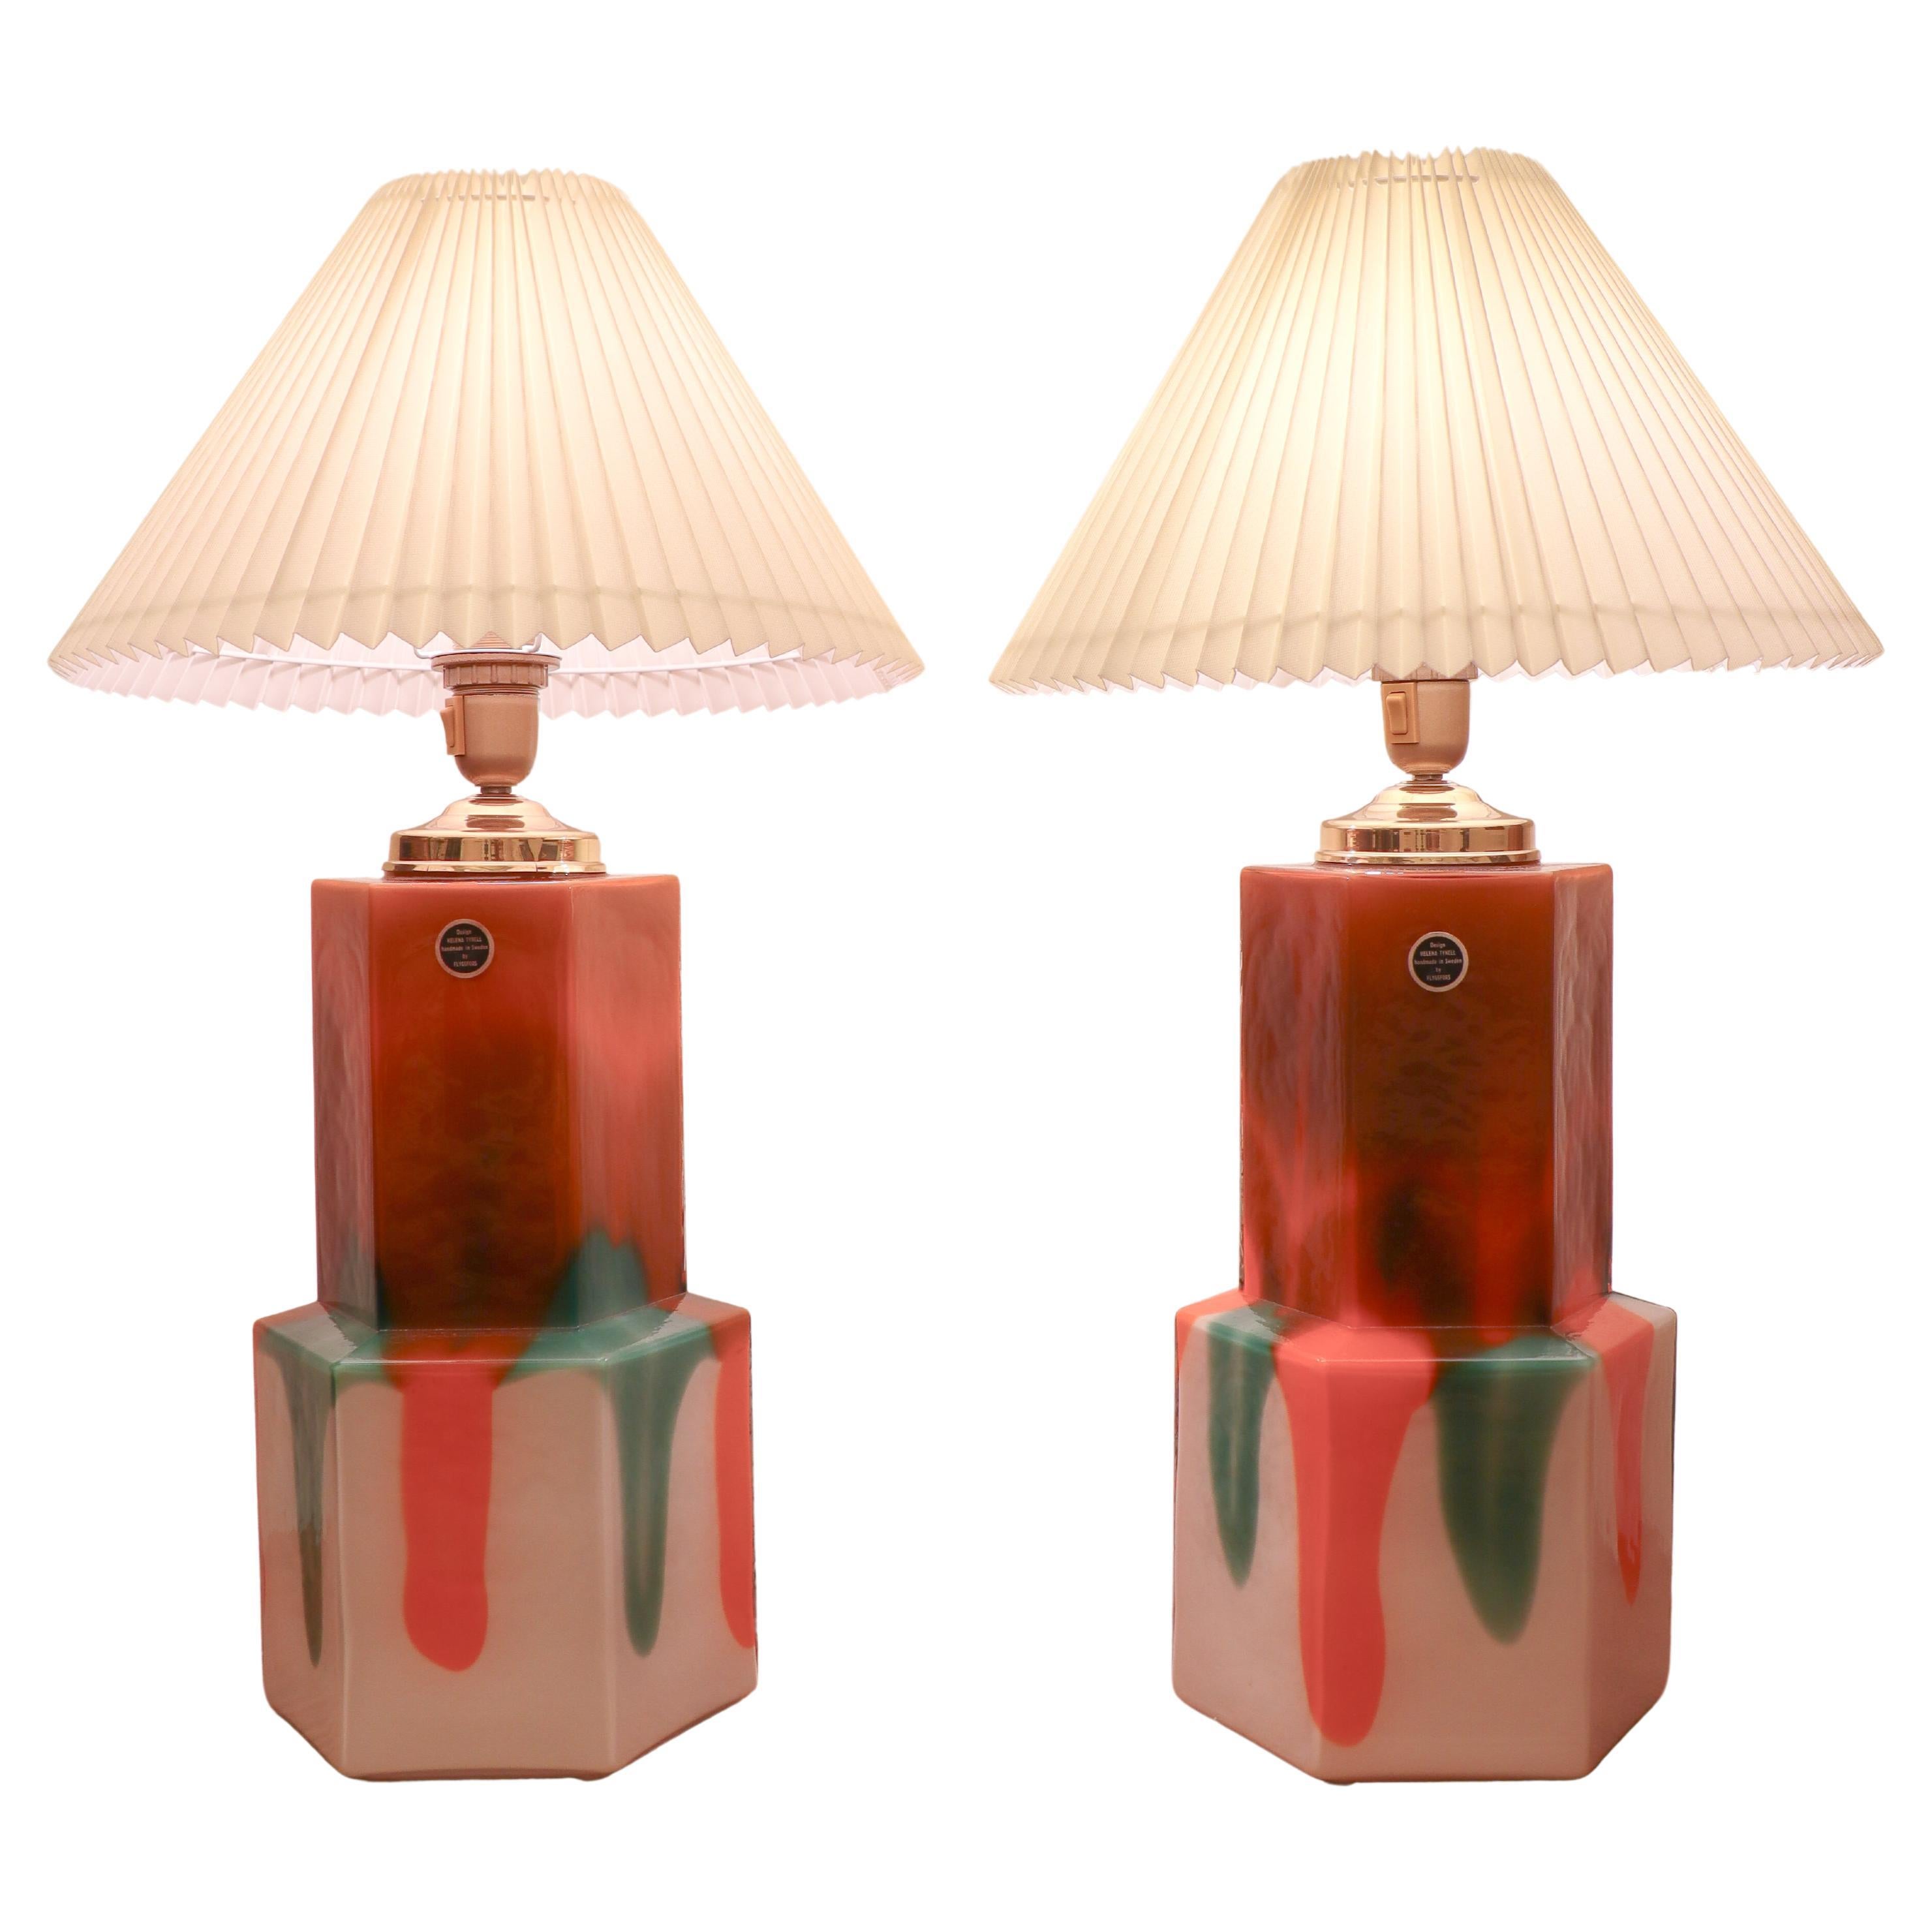 Flygsfors Table Lamps